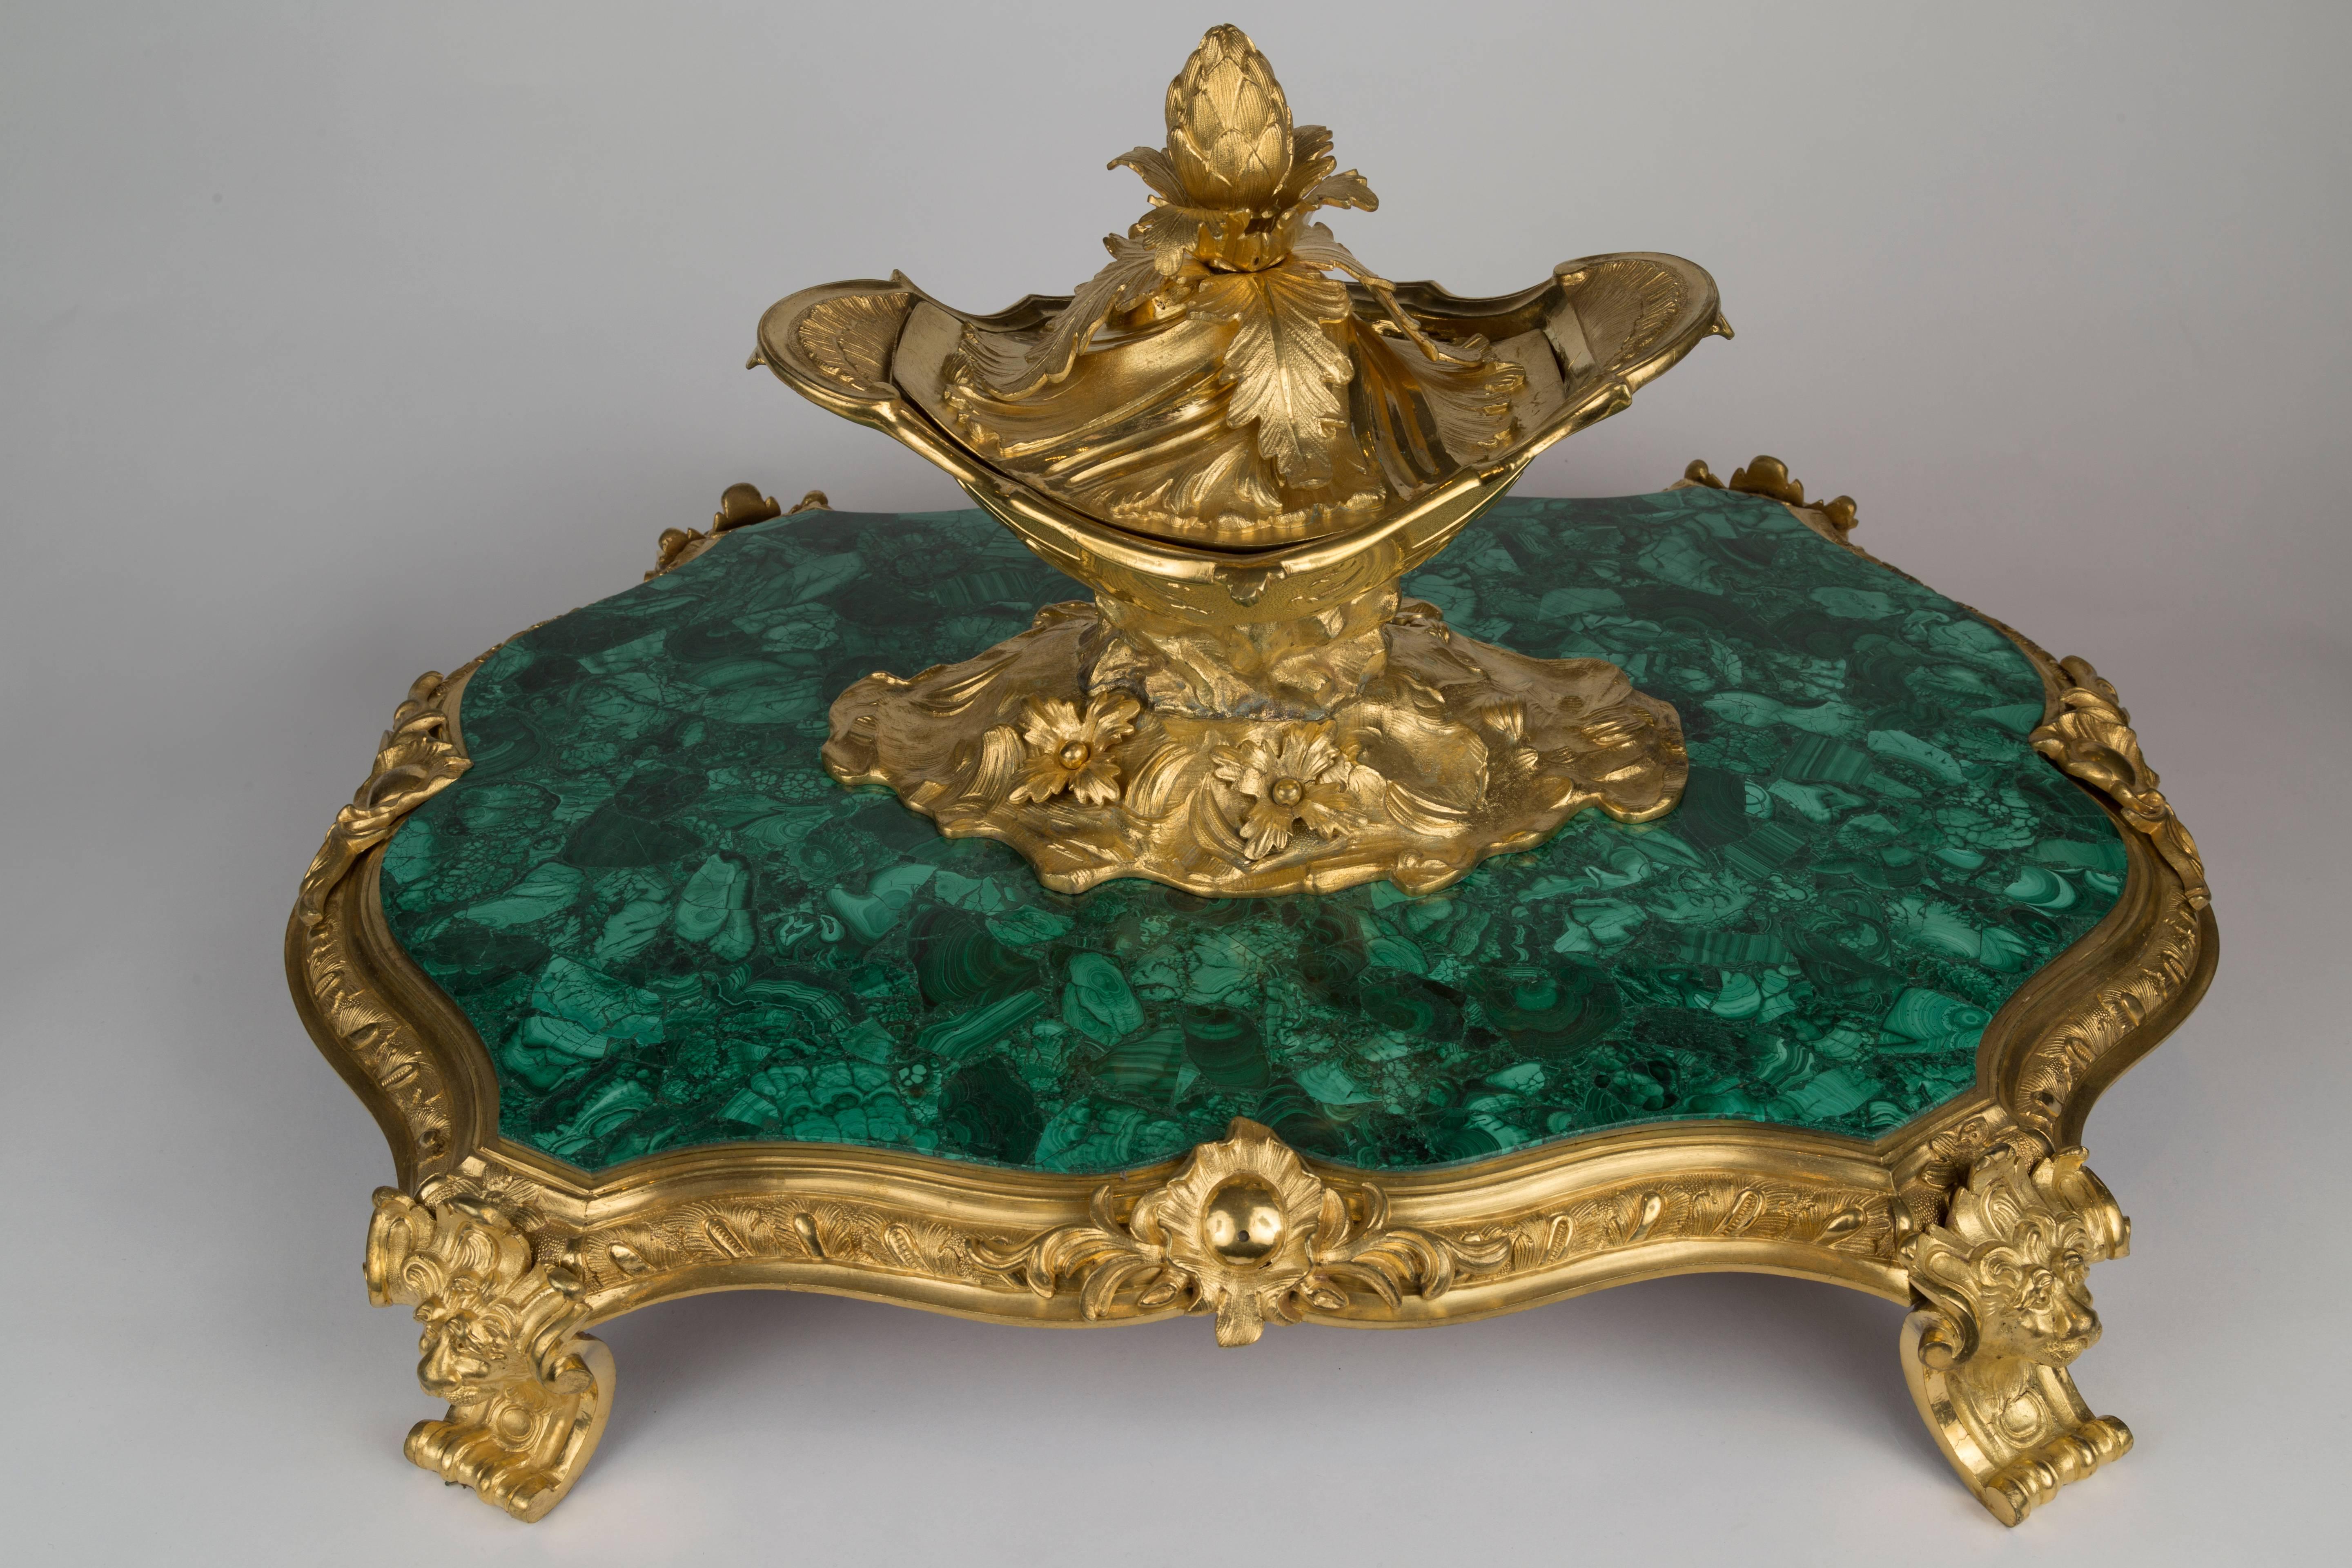 Very large Louis XVI malachite and ormolu-mounted centerpiece
ornate gilt bronze lidded dish with floral leaf motif
accentuated and raised with figural lion mounts
France, 19th century
Measures: H 15 in. x 25 in. x 19 in.